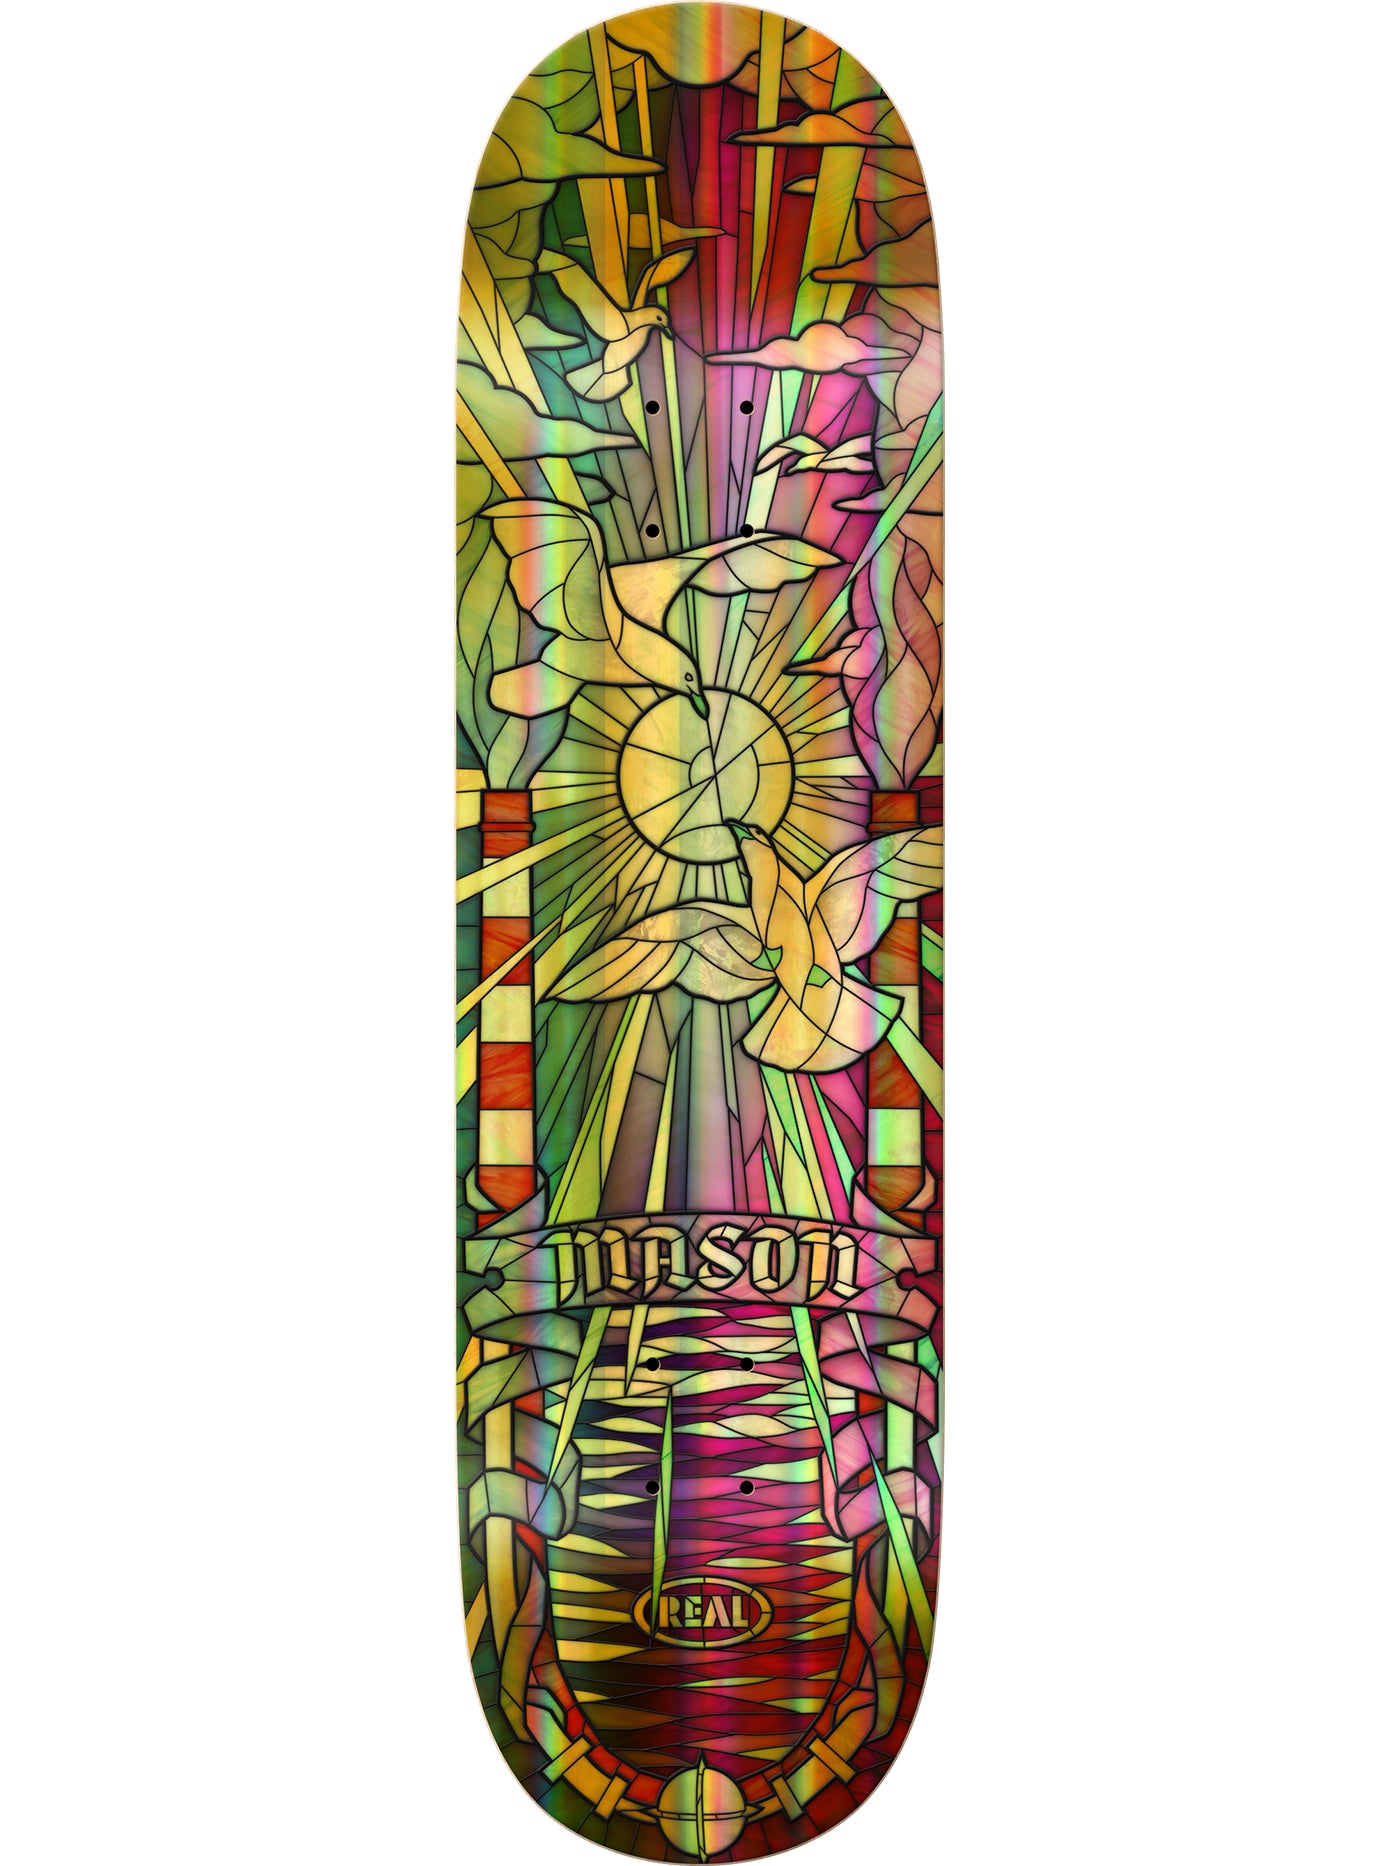 Real Cathedral Holographic Foil Mason 8.25 Skateboard Deck